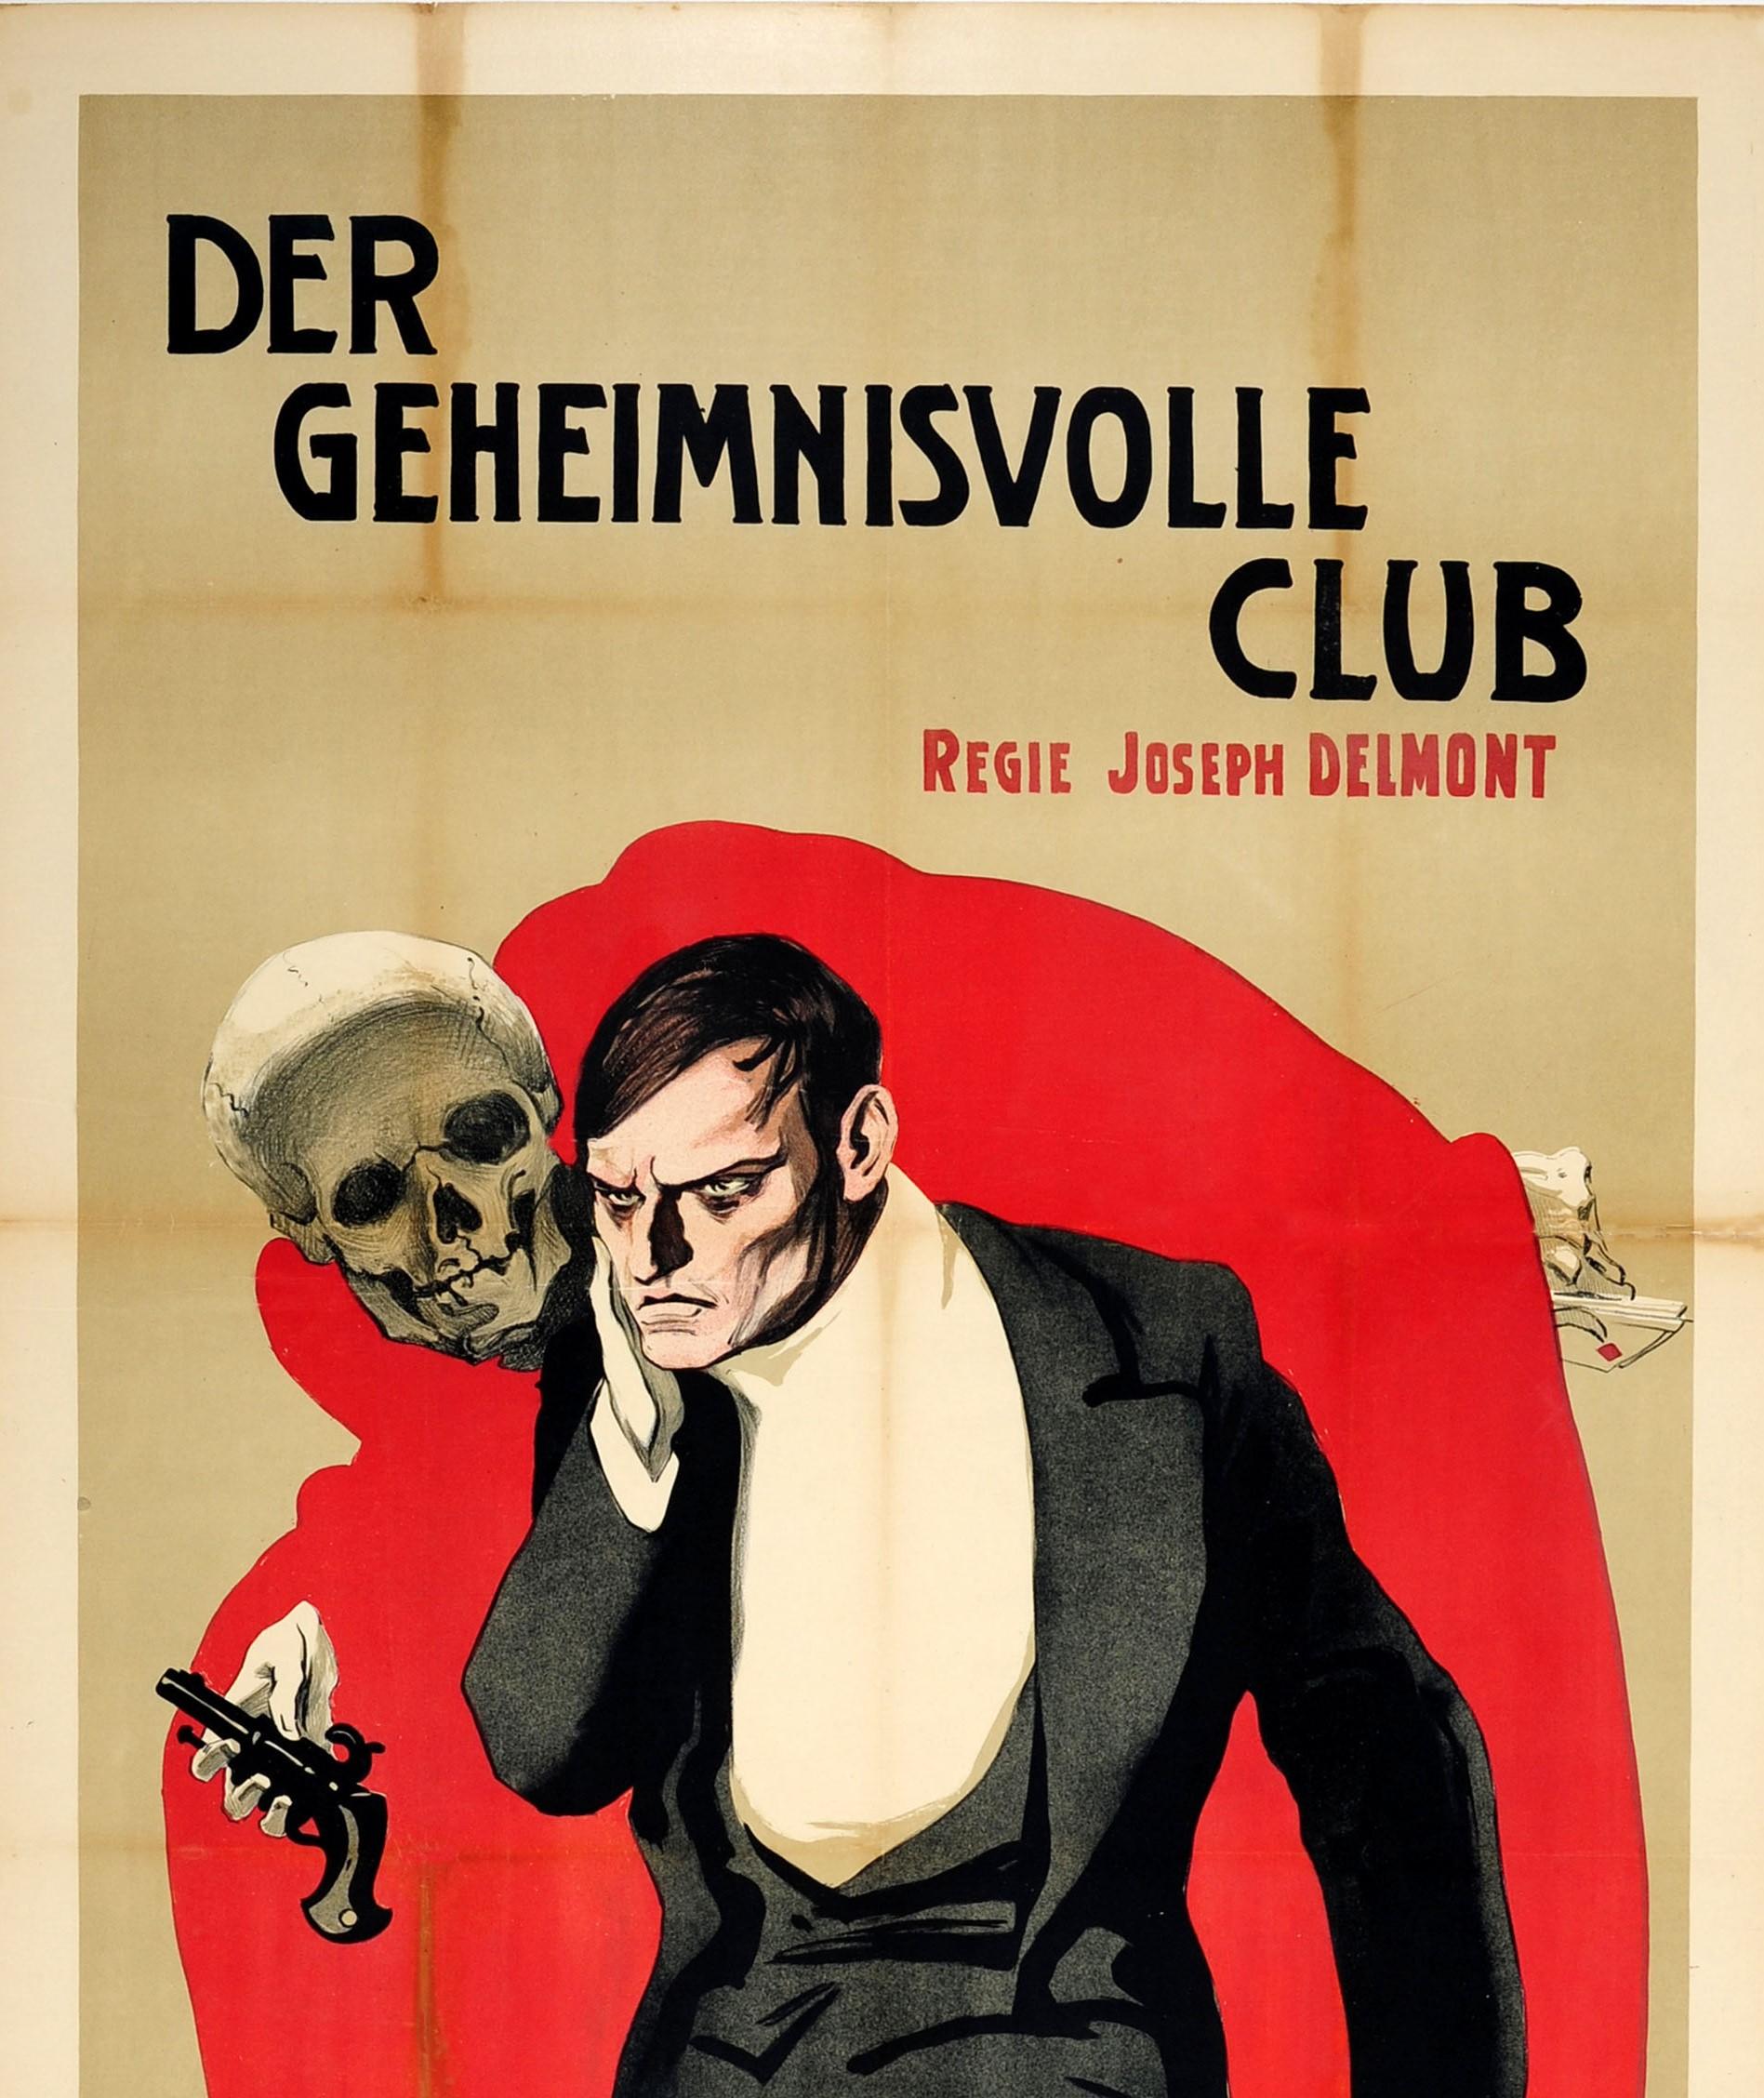 Original antique film poster for a movie - Der Geheimnisvolle Club / The Mysterious Club - based on the 1896 book 